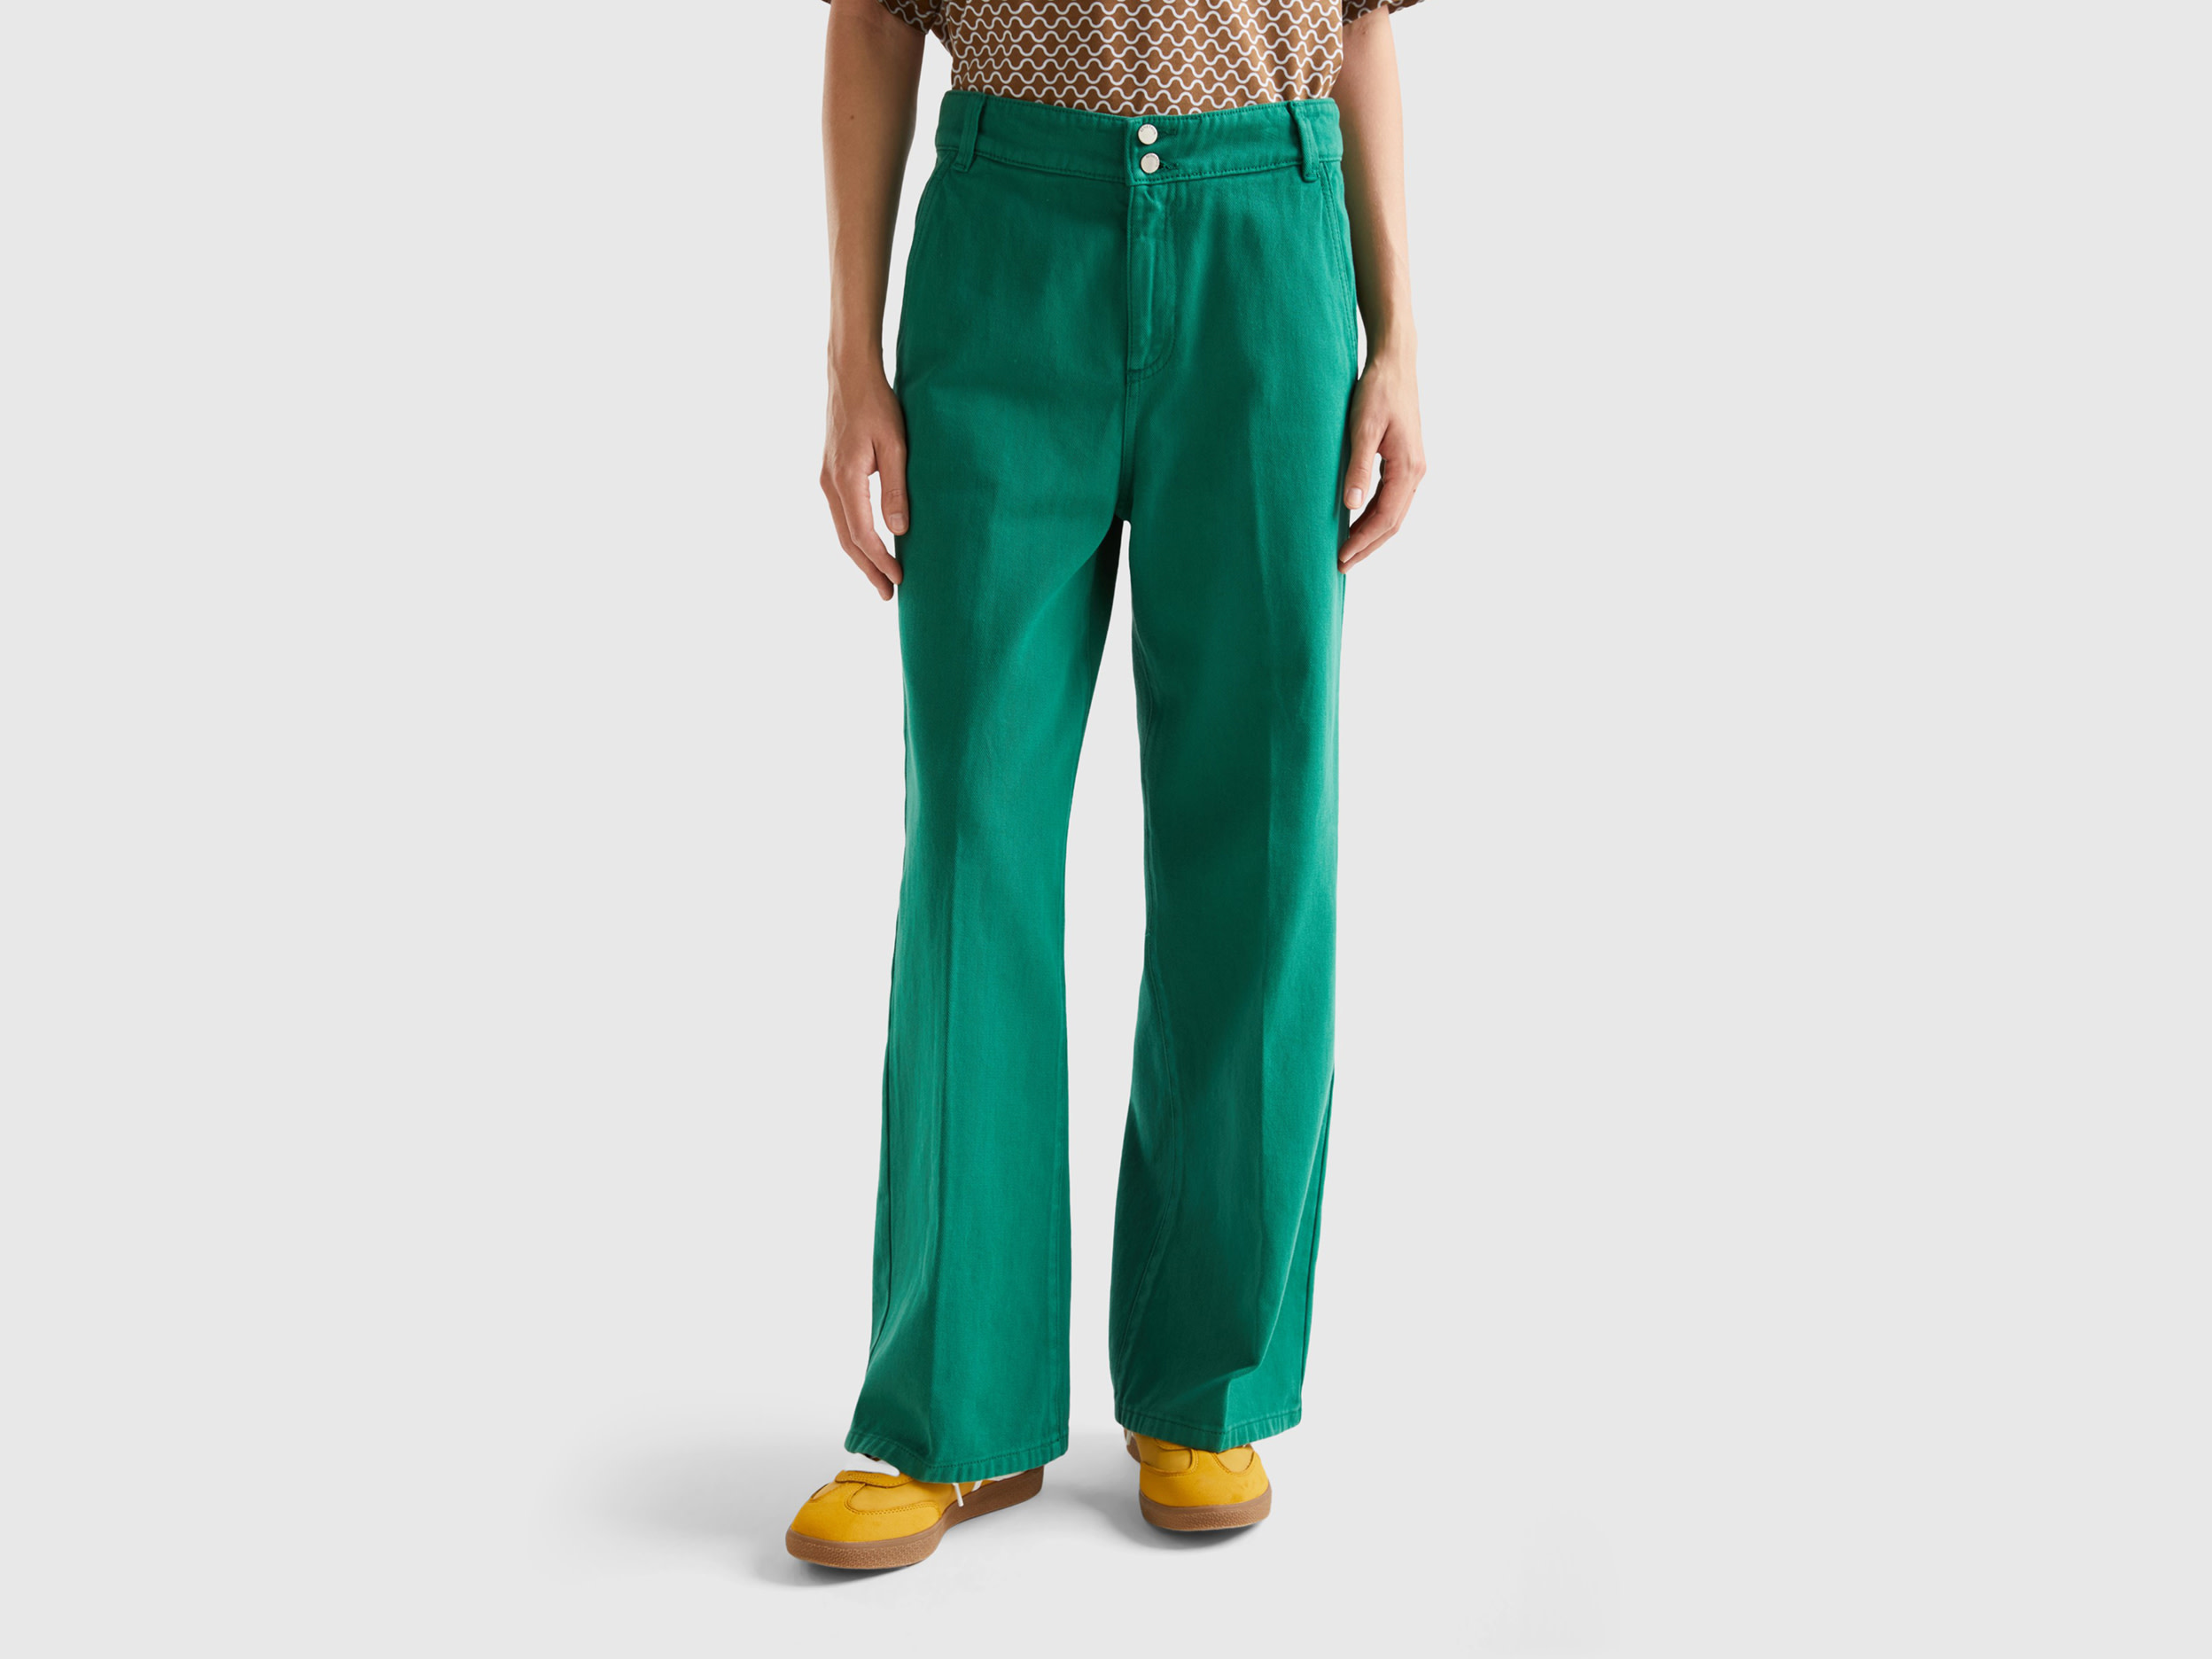 Benetton, High-waisted Trousers With Wide Leg, size , Green, Women